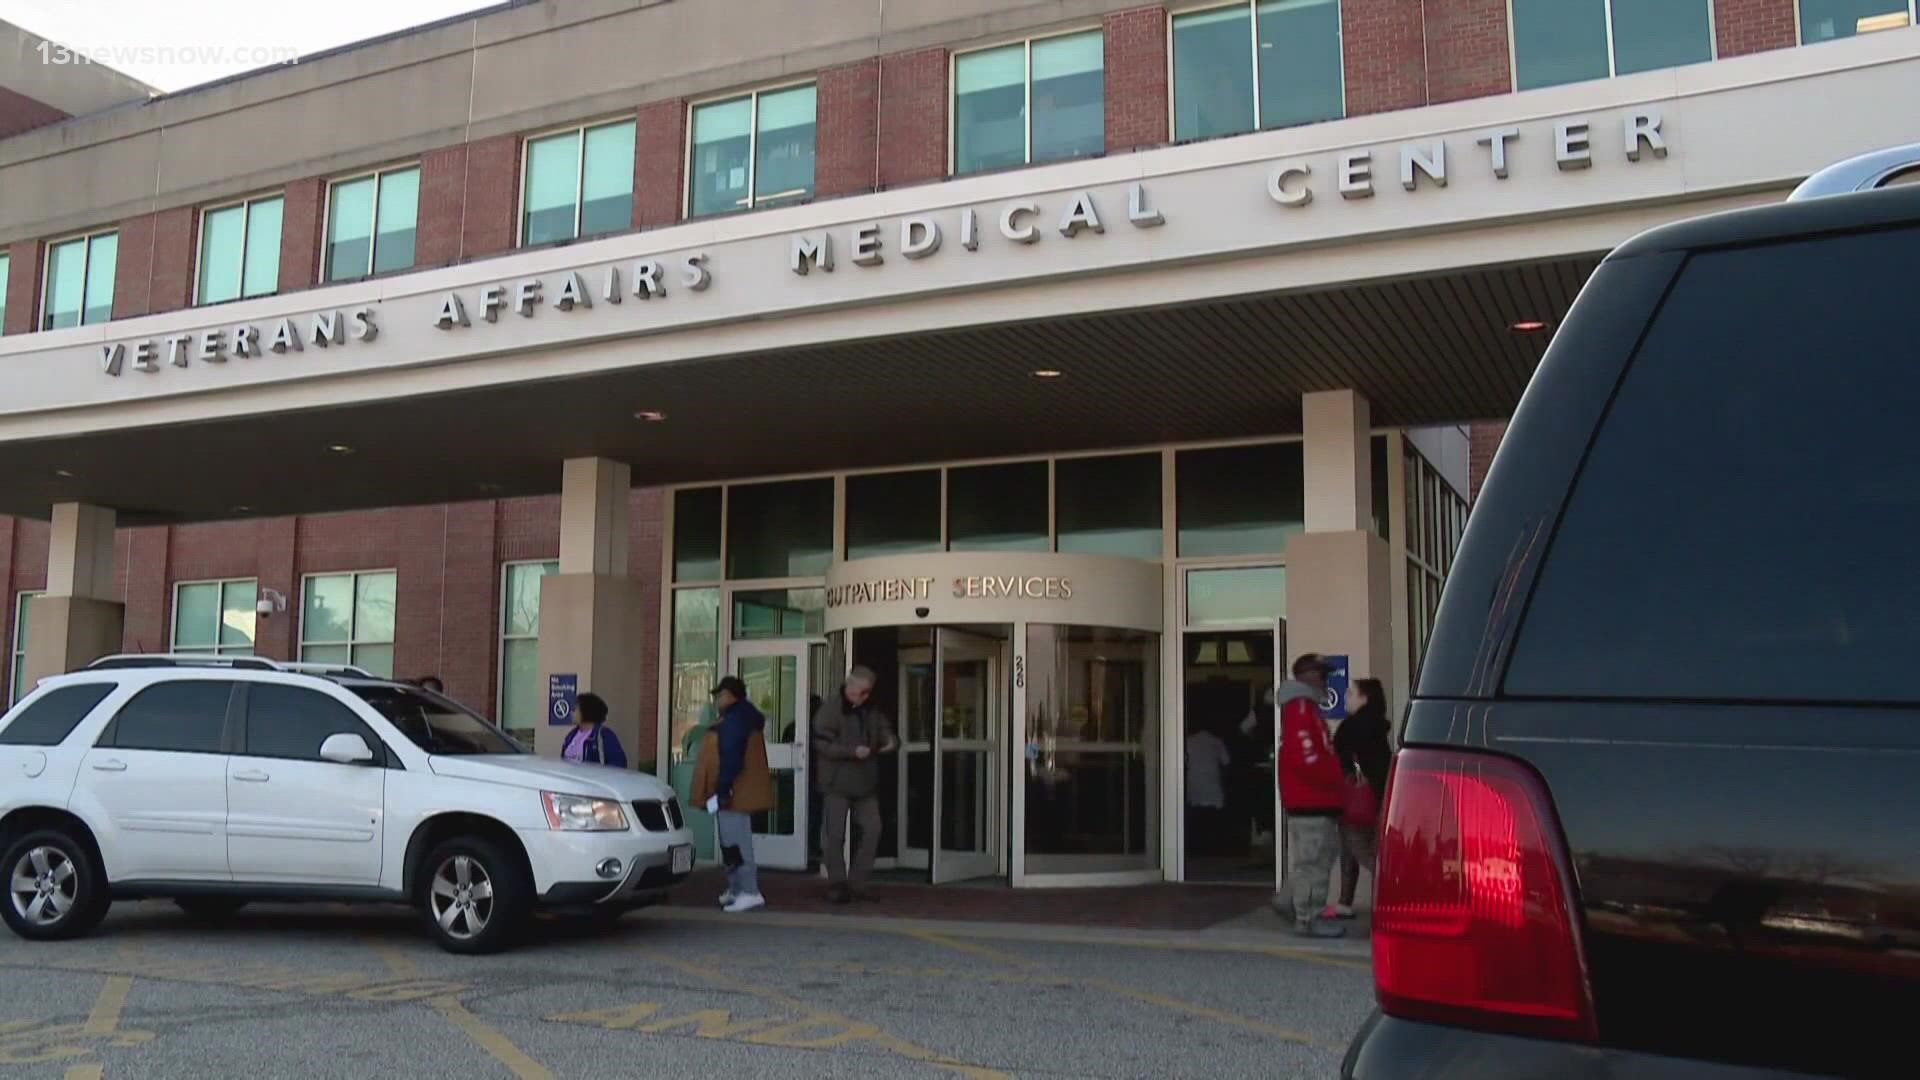 A new report from the Department of Veterans Affairs recommends a new VA Center in Newport News and a new center in Norfolk while closing the one in Hampton.